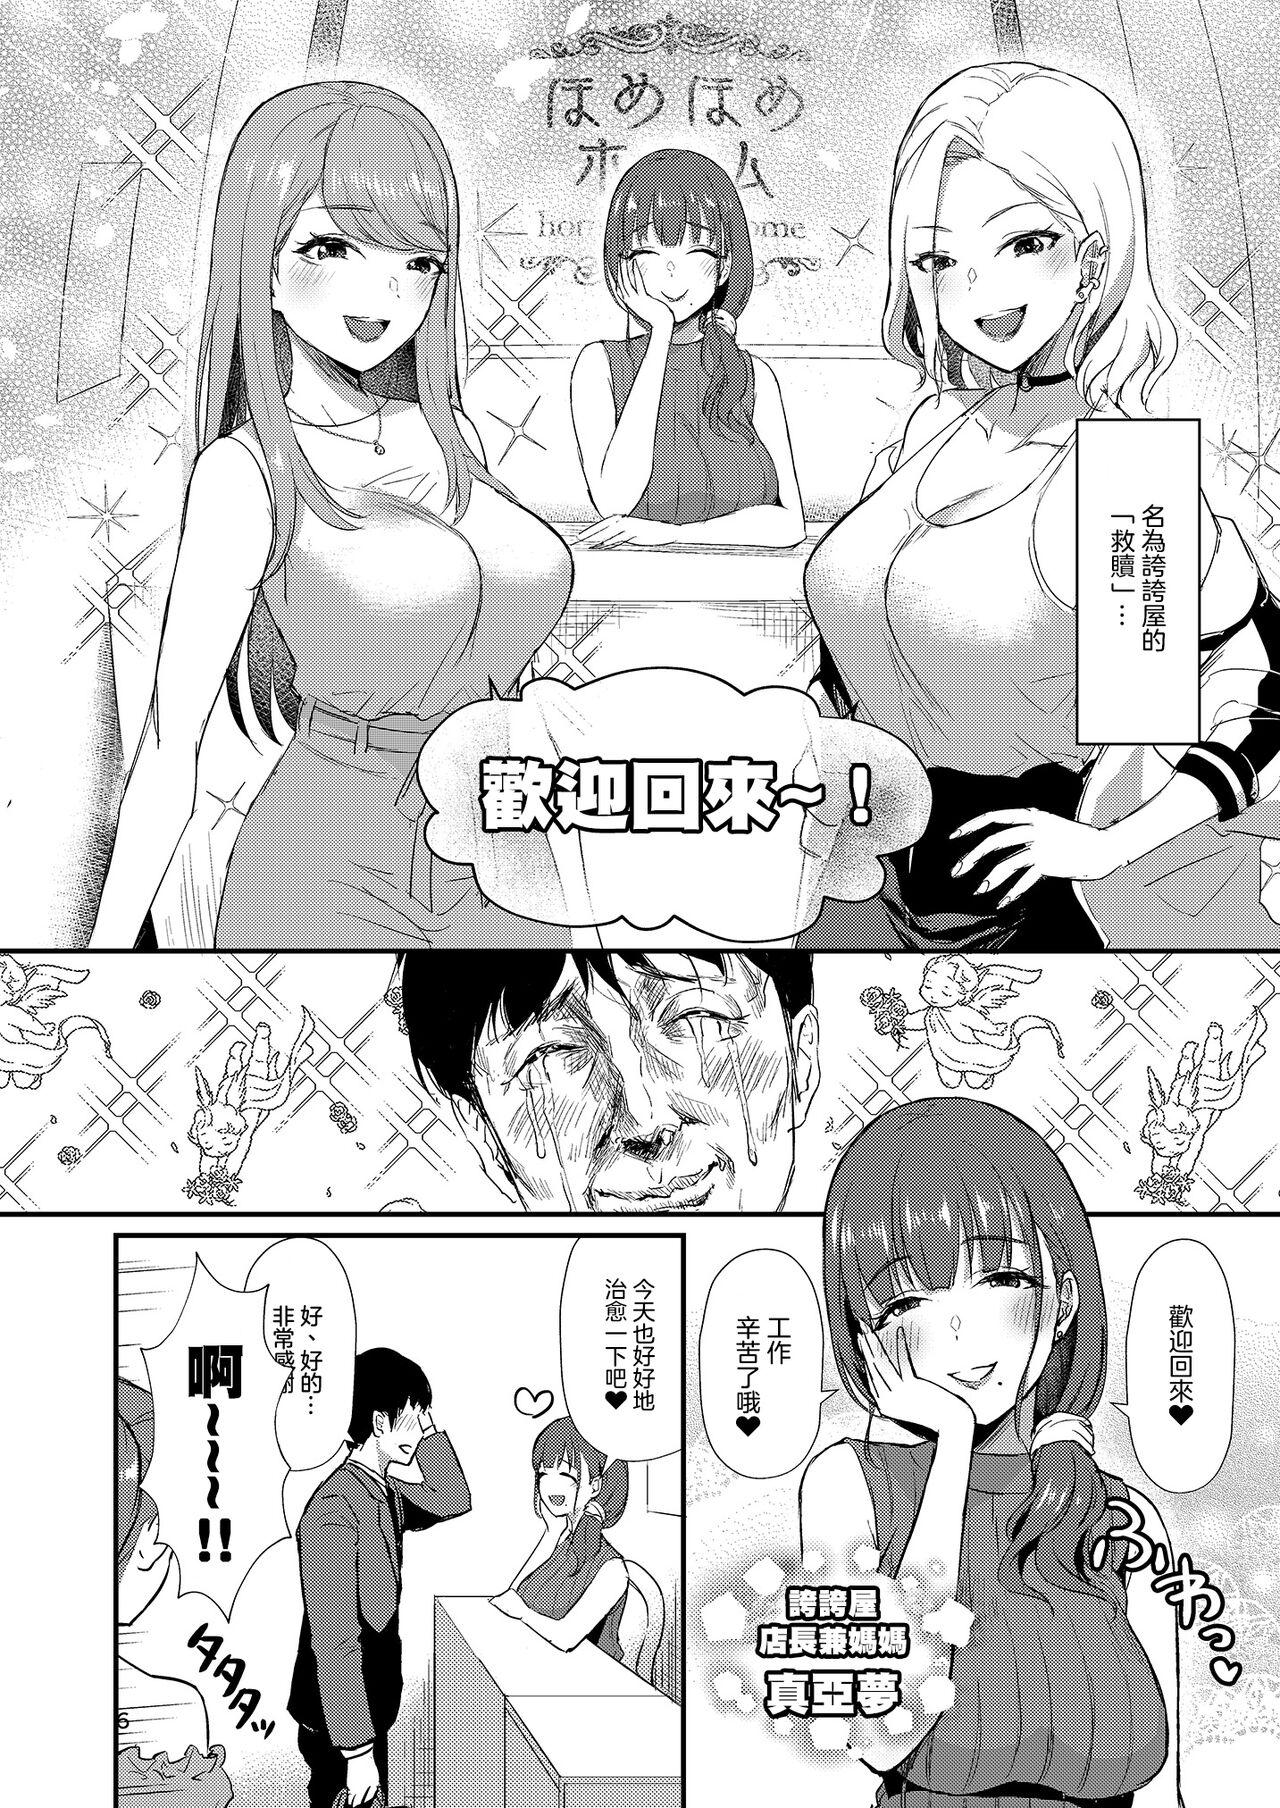 Piercings Homehome Home e Youkoso! - Welcome to Home Home Home! | 歡迎來到誇誇屋！ Sister - Page 7